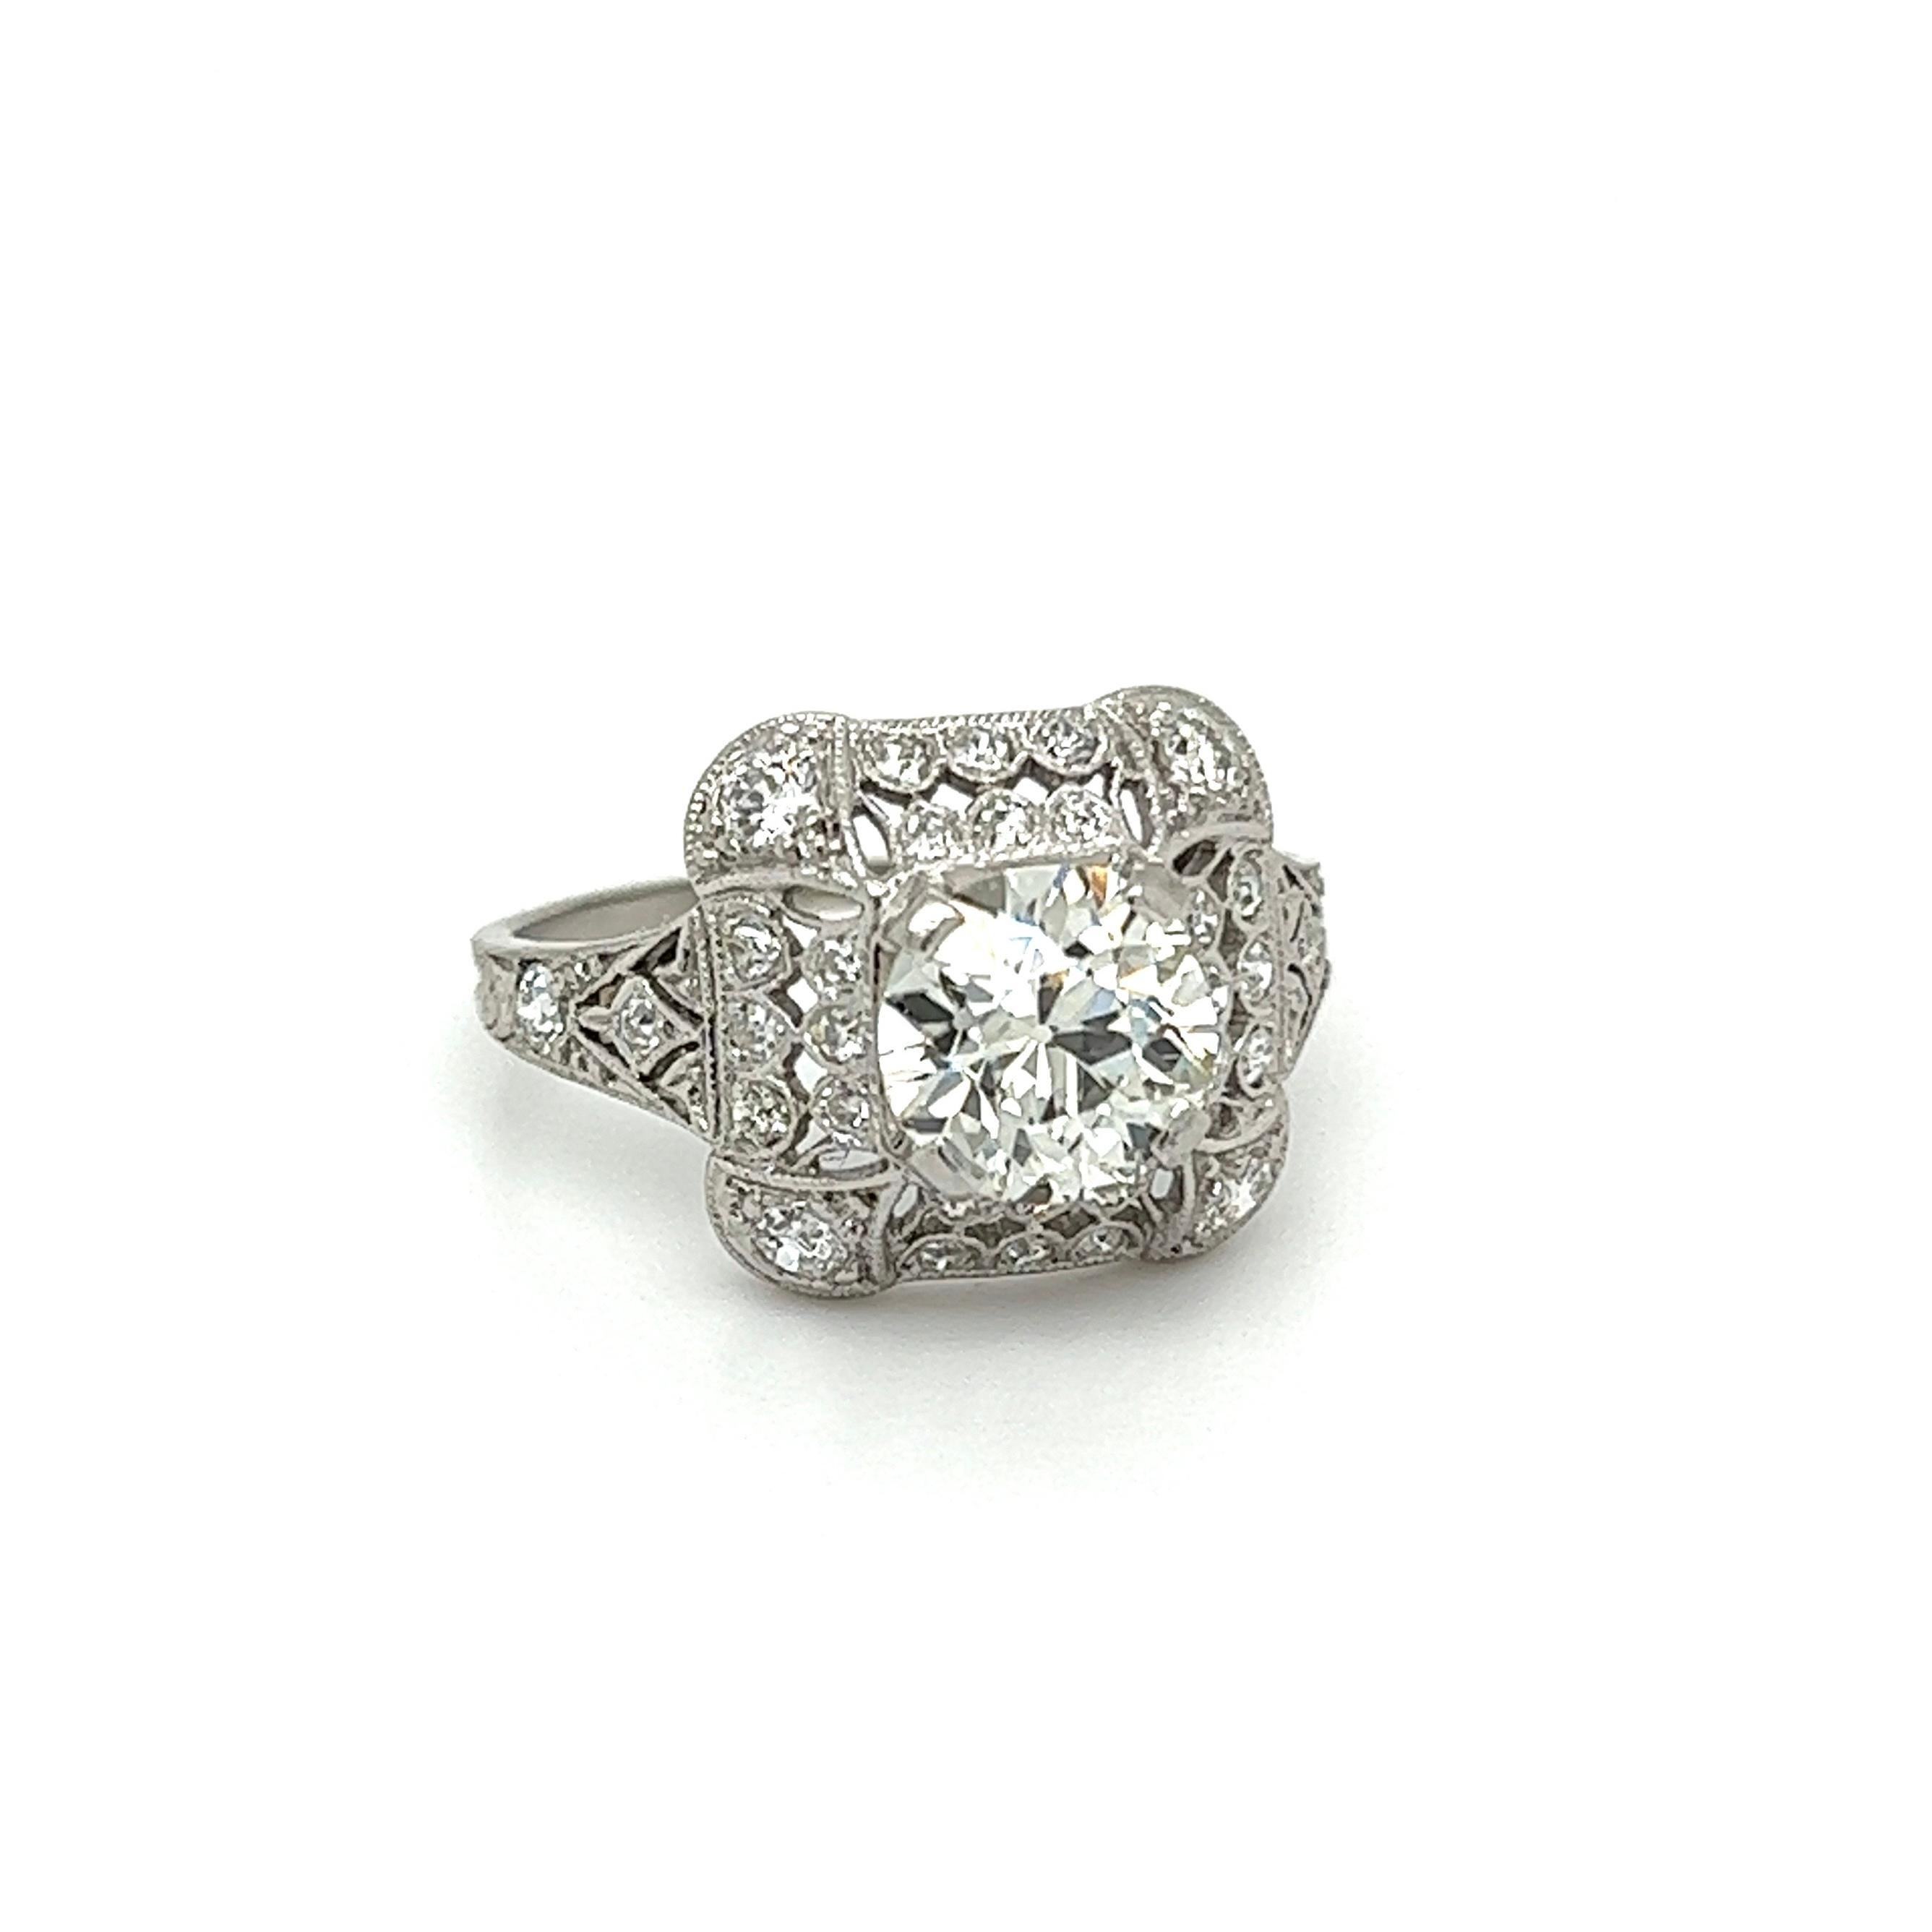 Simply Beautiful! Finely detailed Vintage Art Deco OEC Diamond Solitaire Platinum Ring. Centering a securely nestled Hand set Old European Cut Diamond, weighing approx. 1.31 Carats. H/I Color, VS2 Clarity. Surrounded by Diamonds weighing approx.